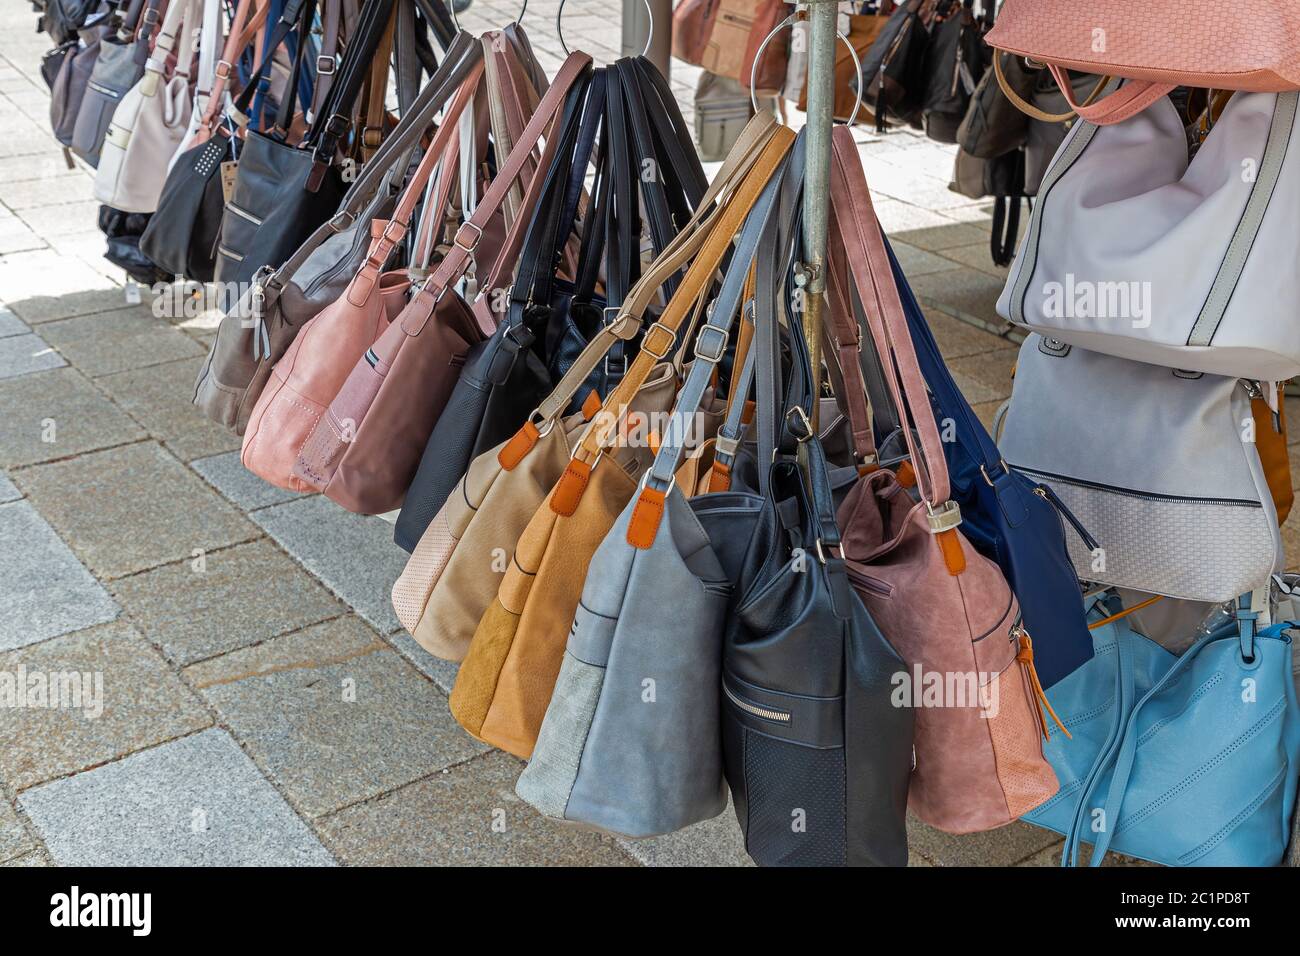 handbags for sale at a market stall in germany 2C1PD8T